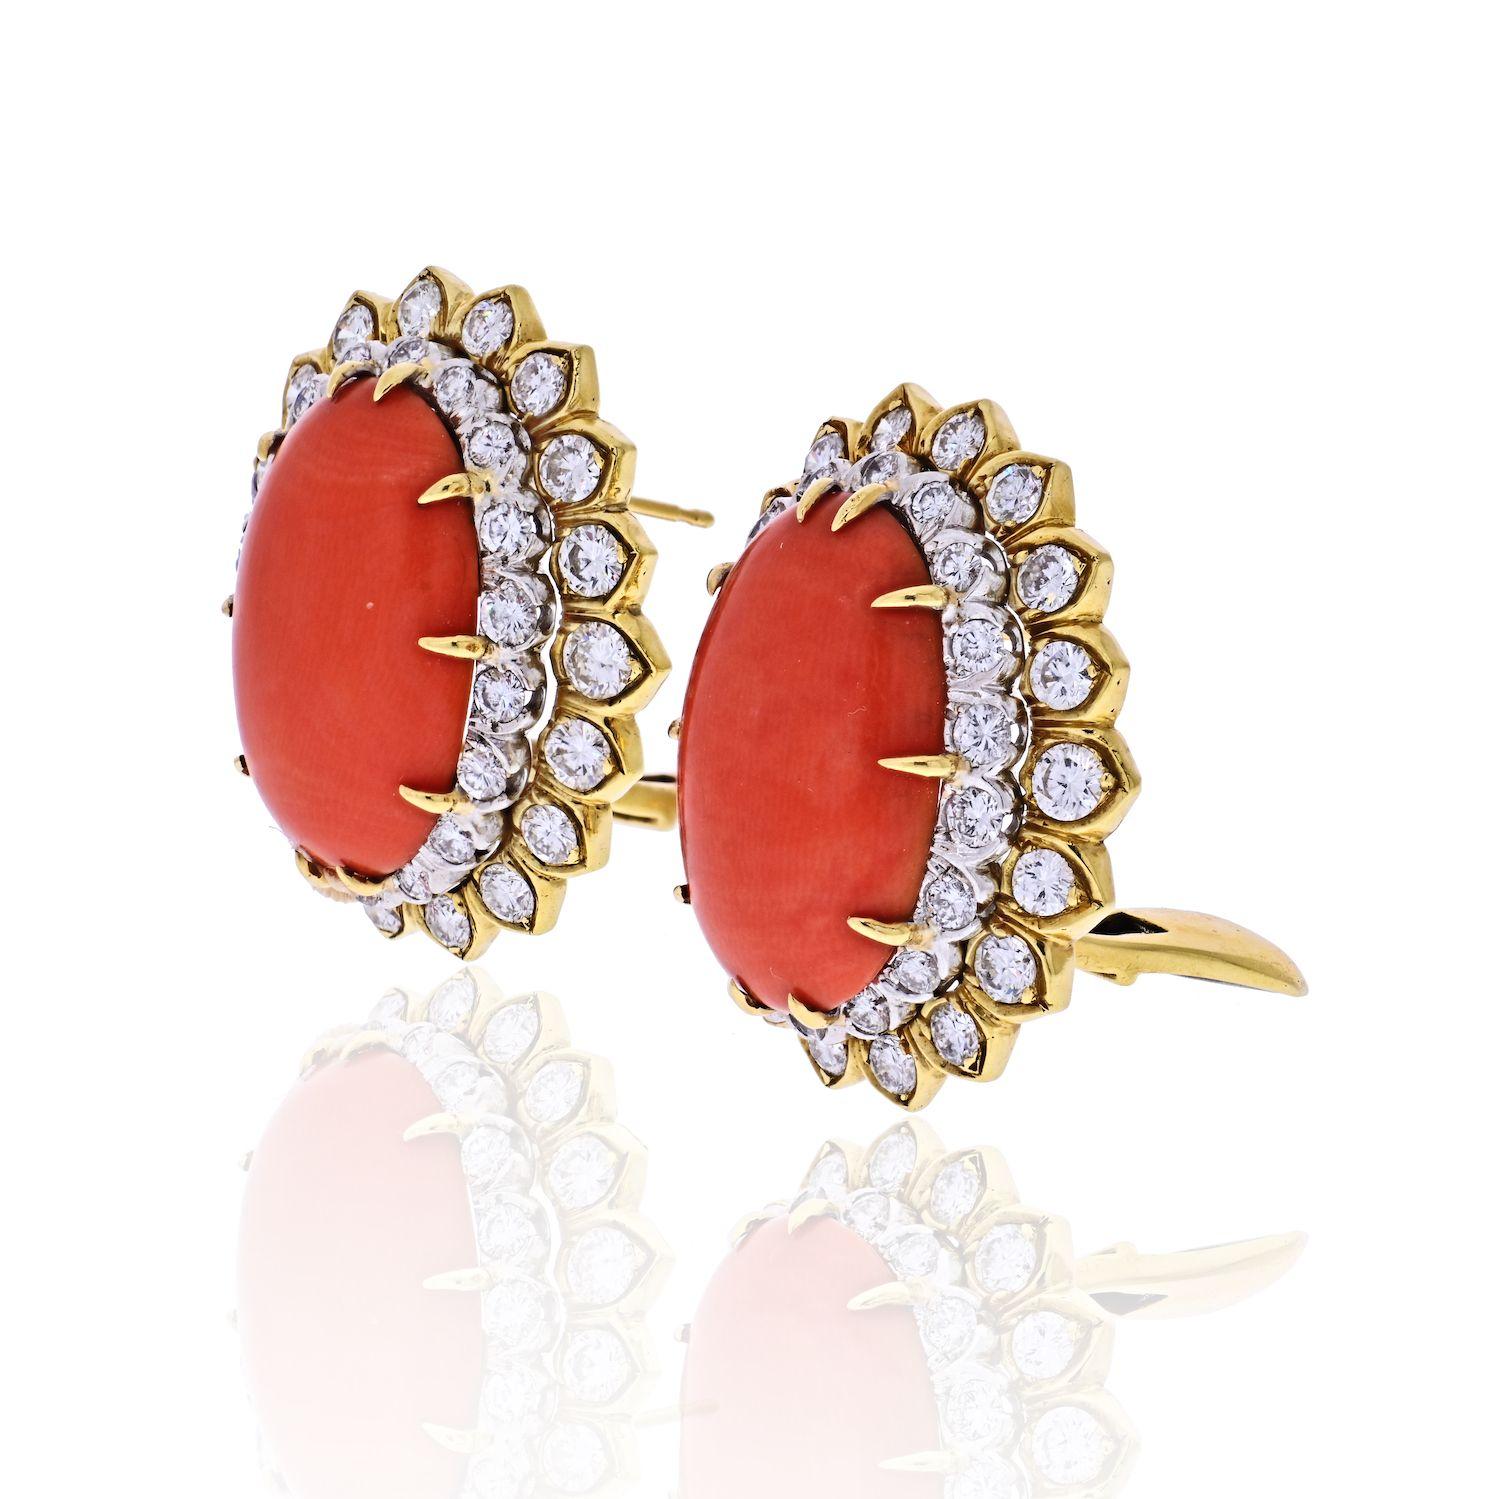 Coral isn't just a peachy color meant for the warmer months. In fact, the shade finds its roots in a deep red stone known for its healing properties. Presented here is a beautiful jewel by David Webb created in 1980's featuring two oval